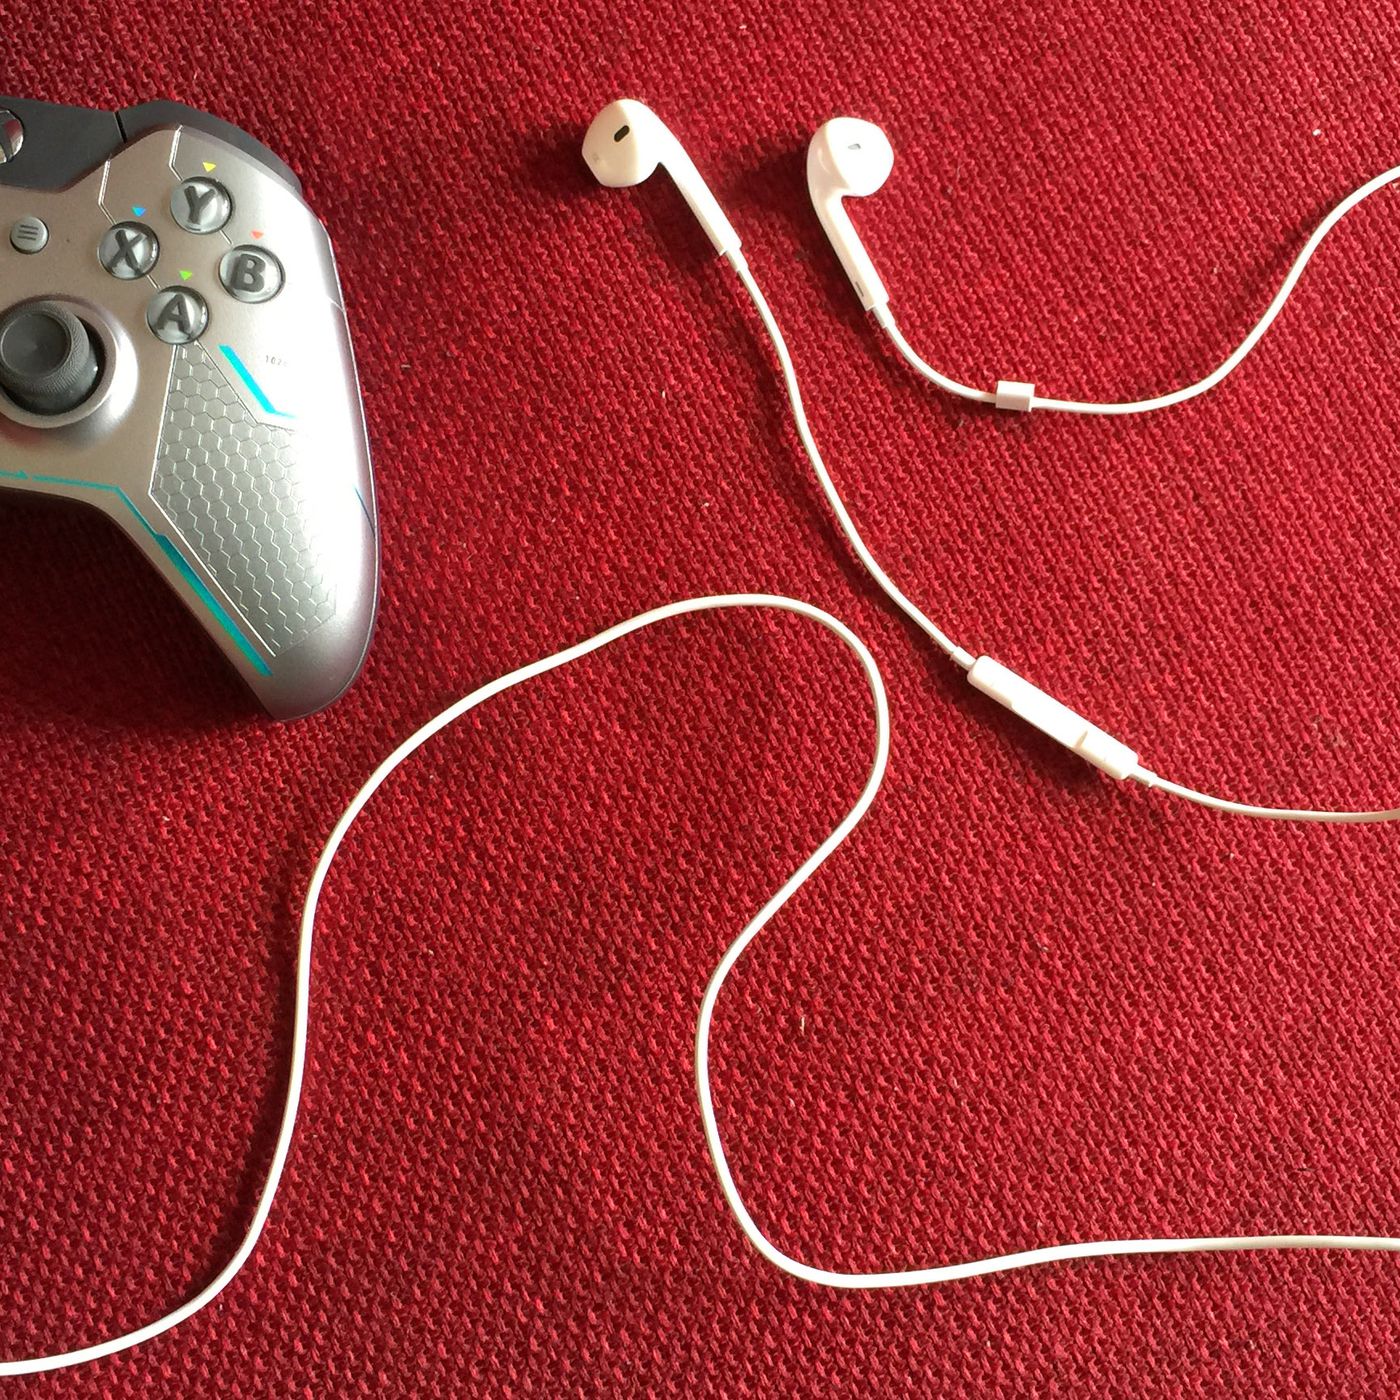 Here's how to use Apple headphones your Xbox One controller - Polygon